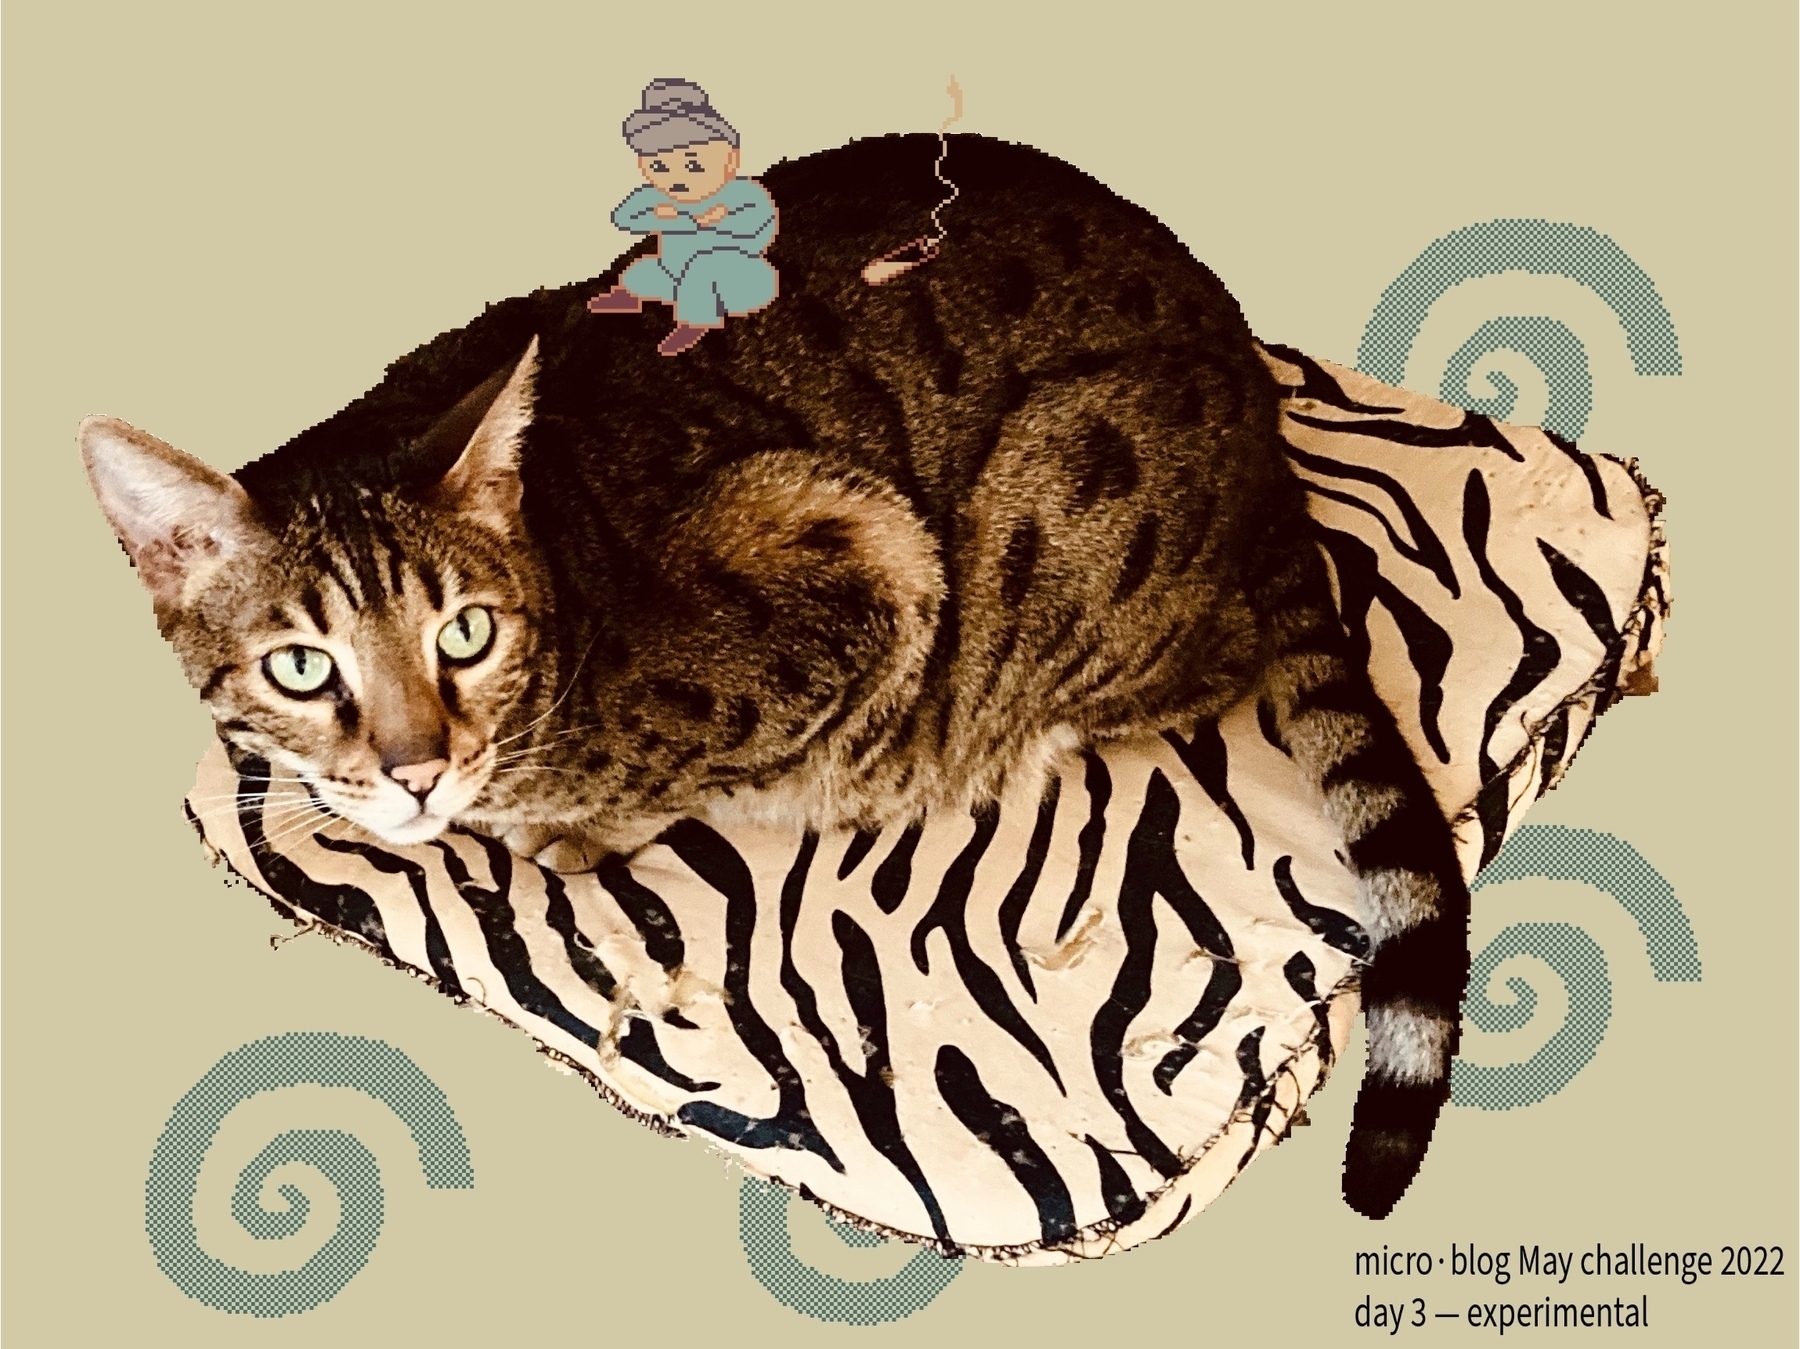 cat on cushion with magician in pixel art on its back